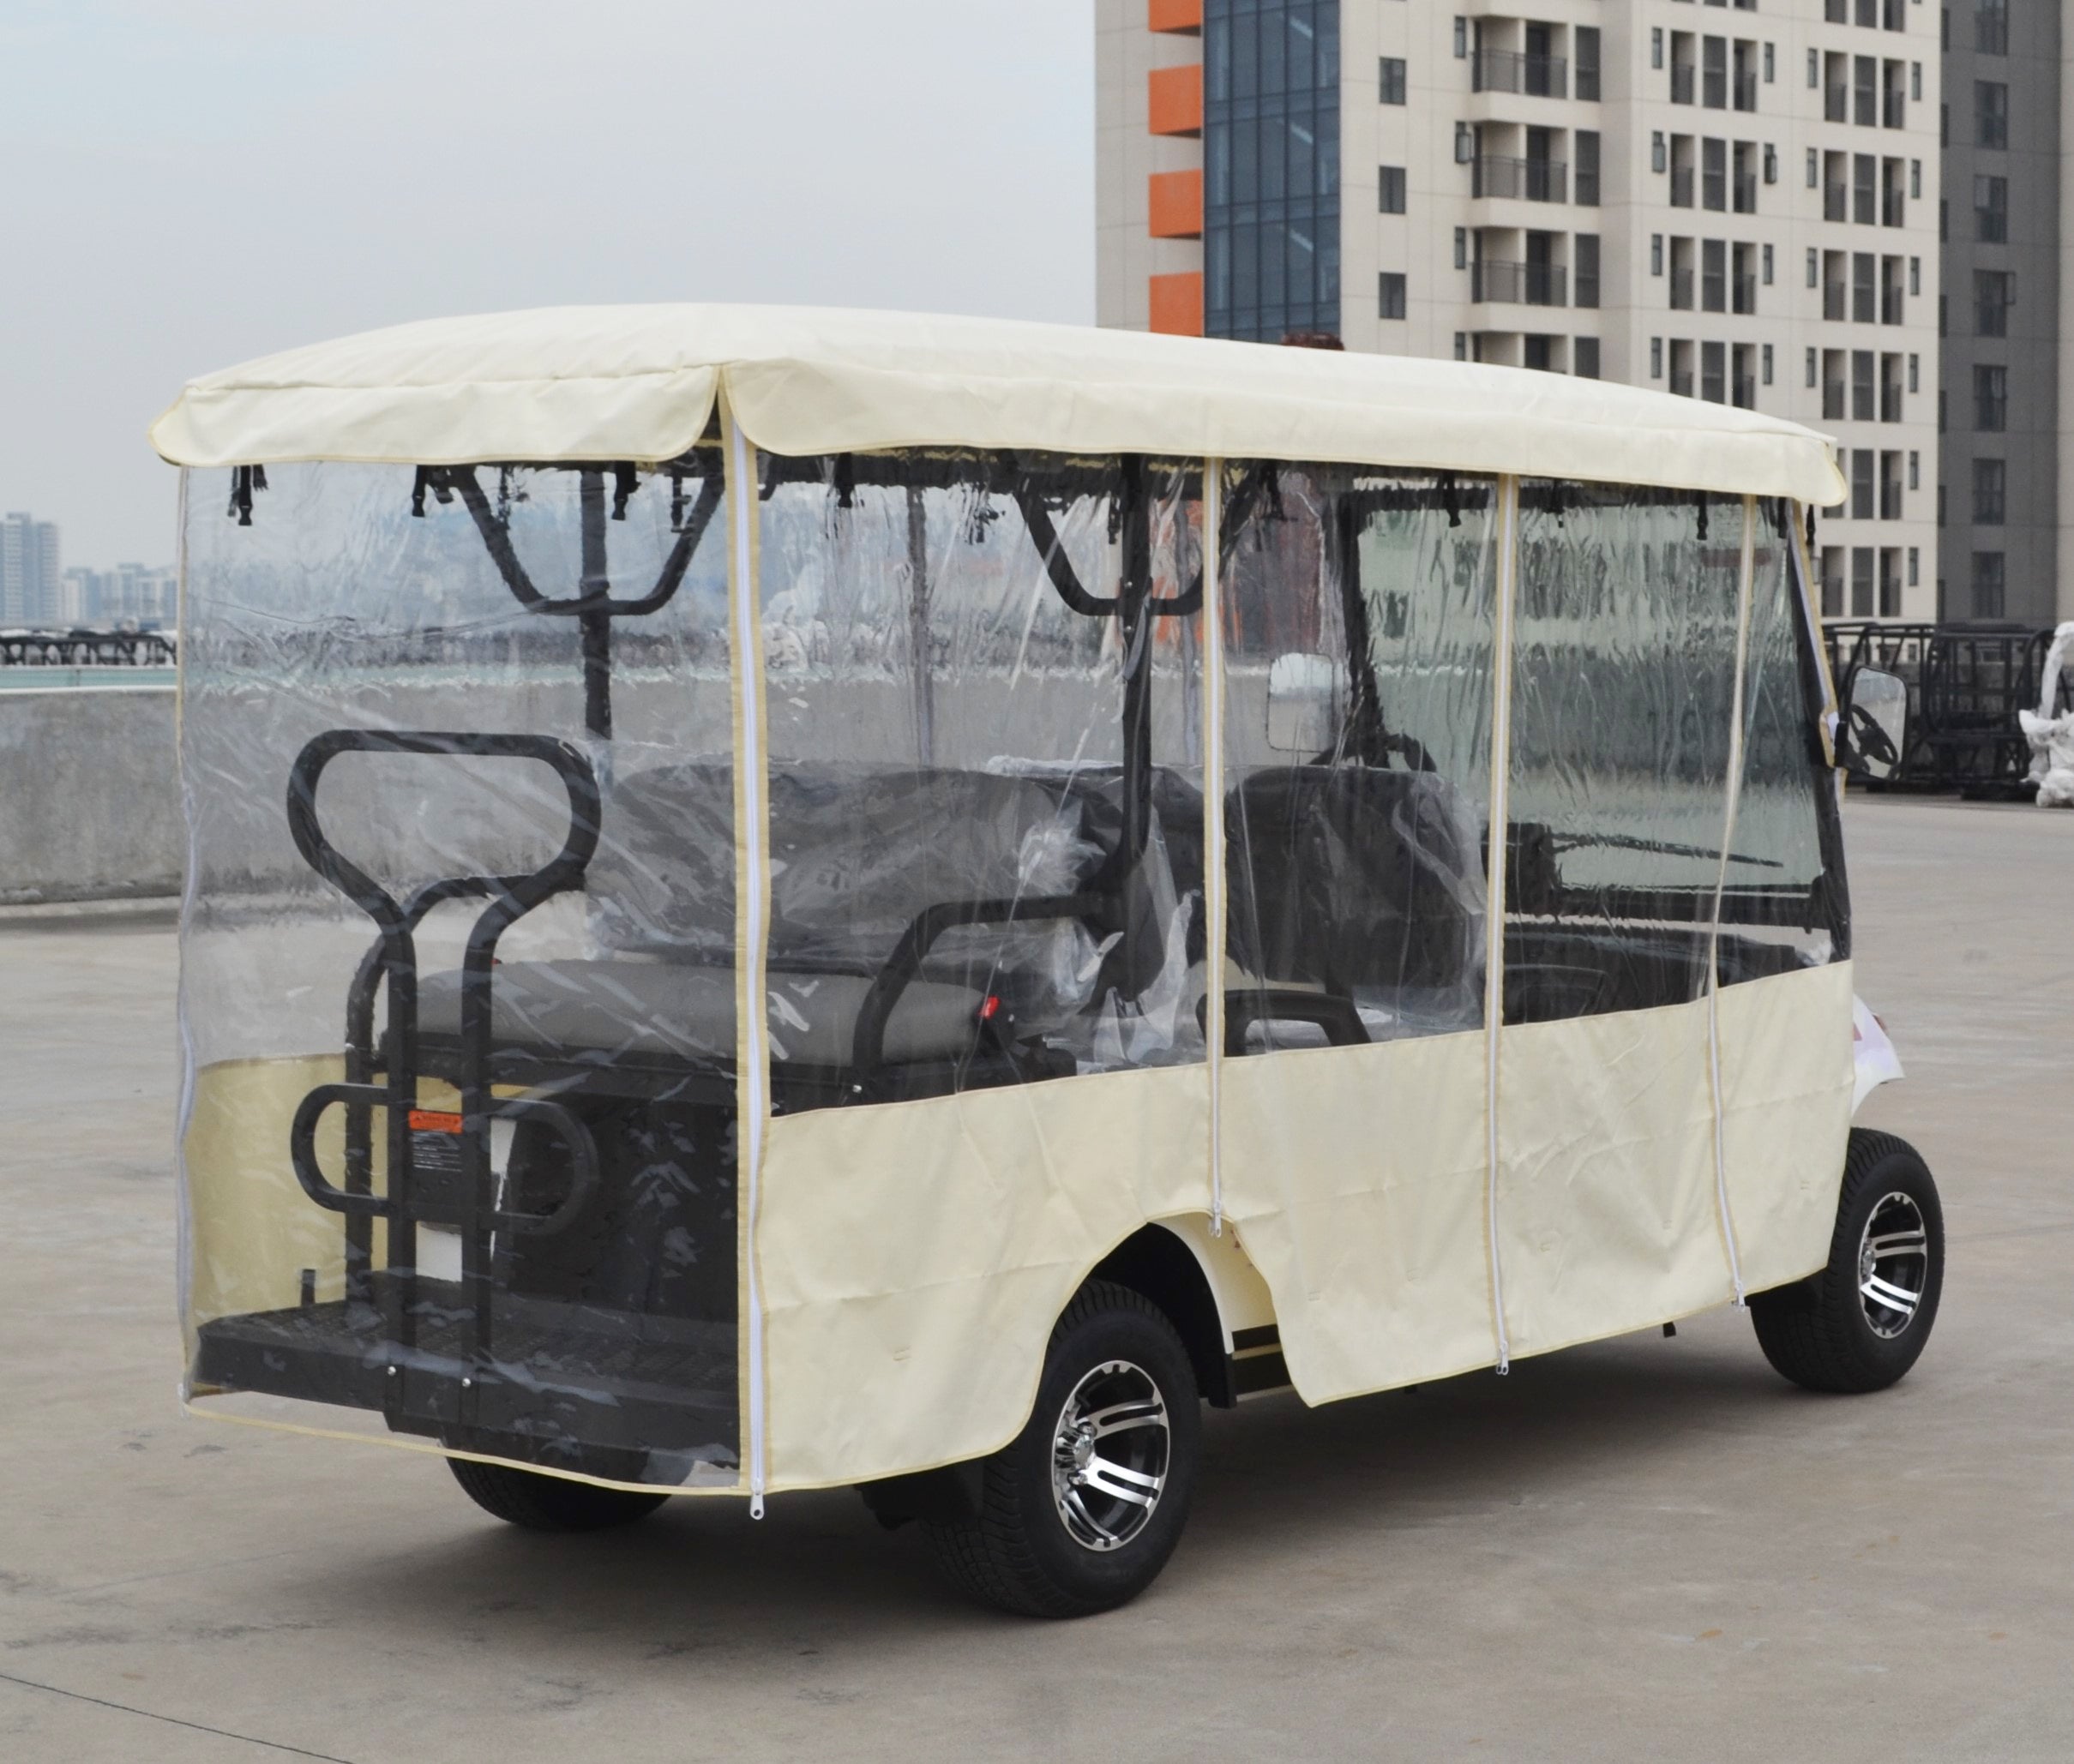 ECAR LT-A827.4+2 - 6 Seaters Golf Cart with Rear Seats